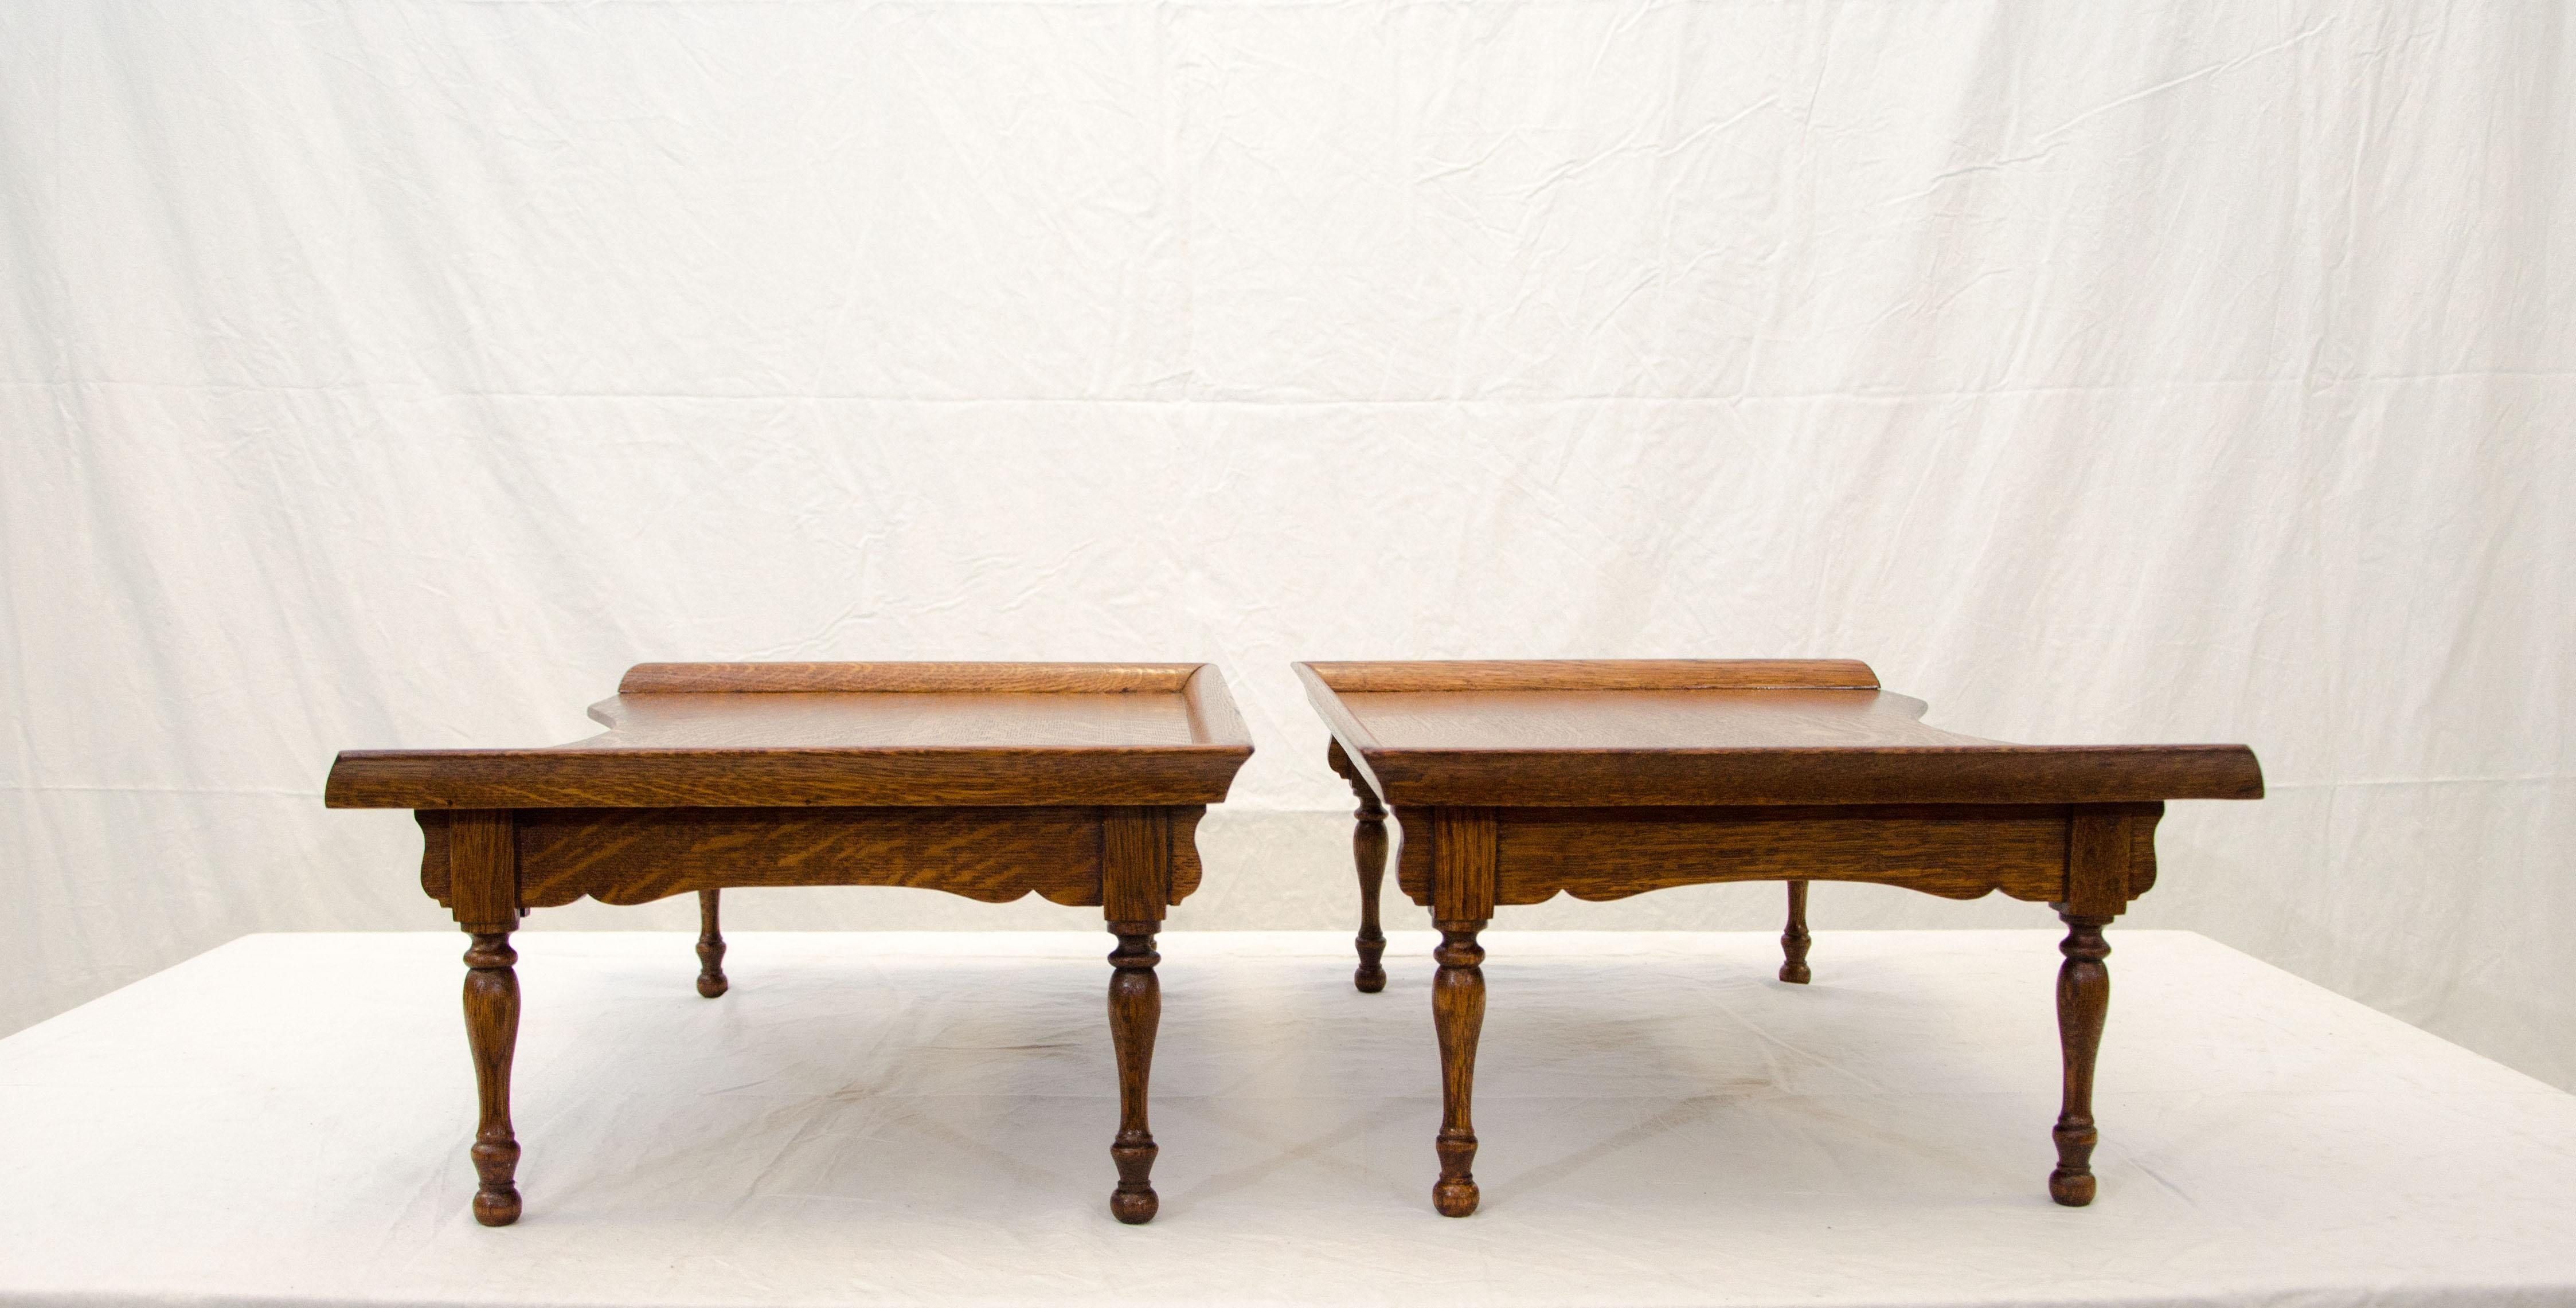 American Pair of Oak Victorian Collapsible Bed Trays or Lap Desks, Turn of the Century